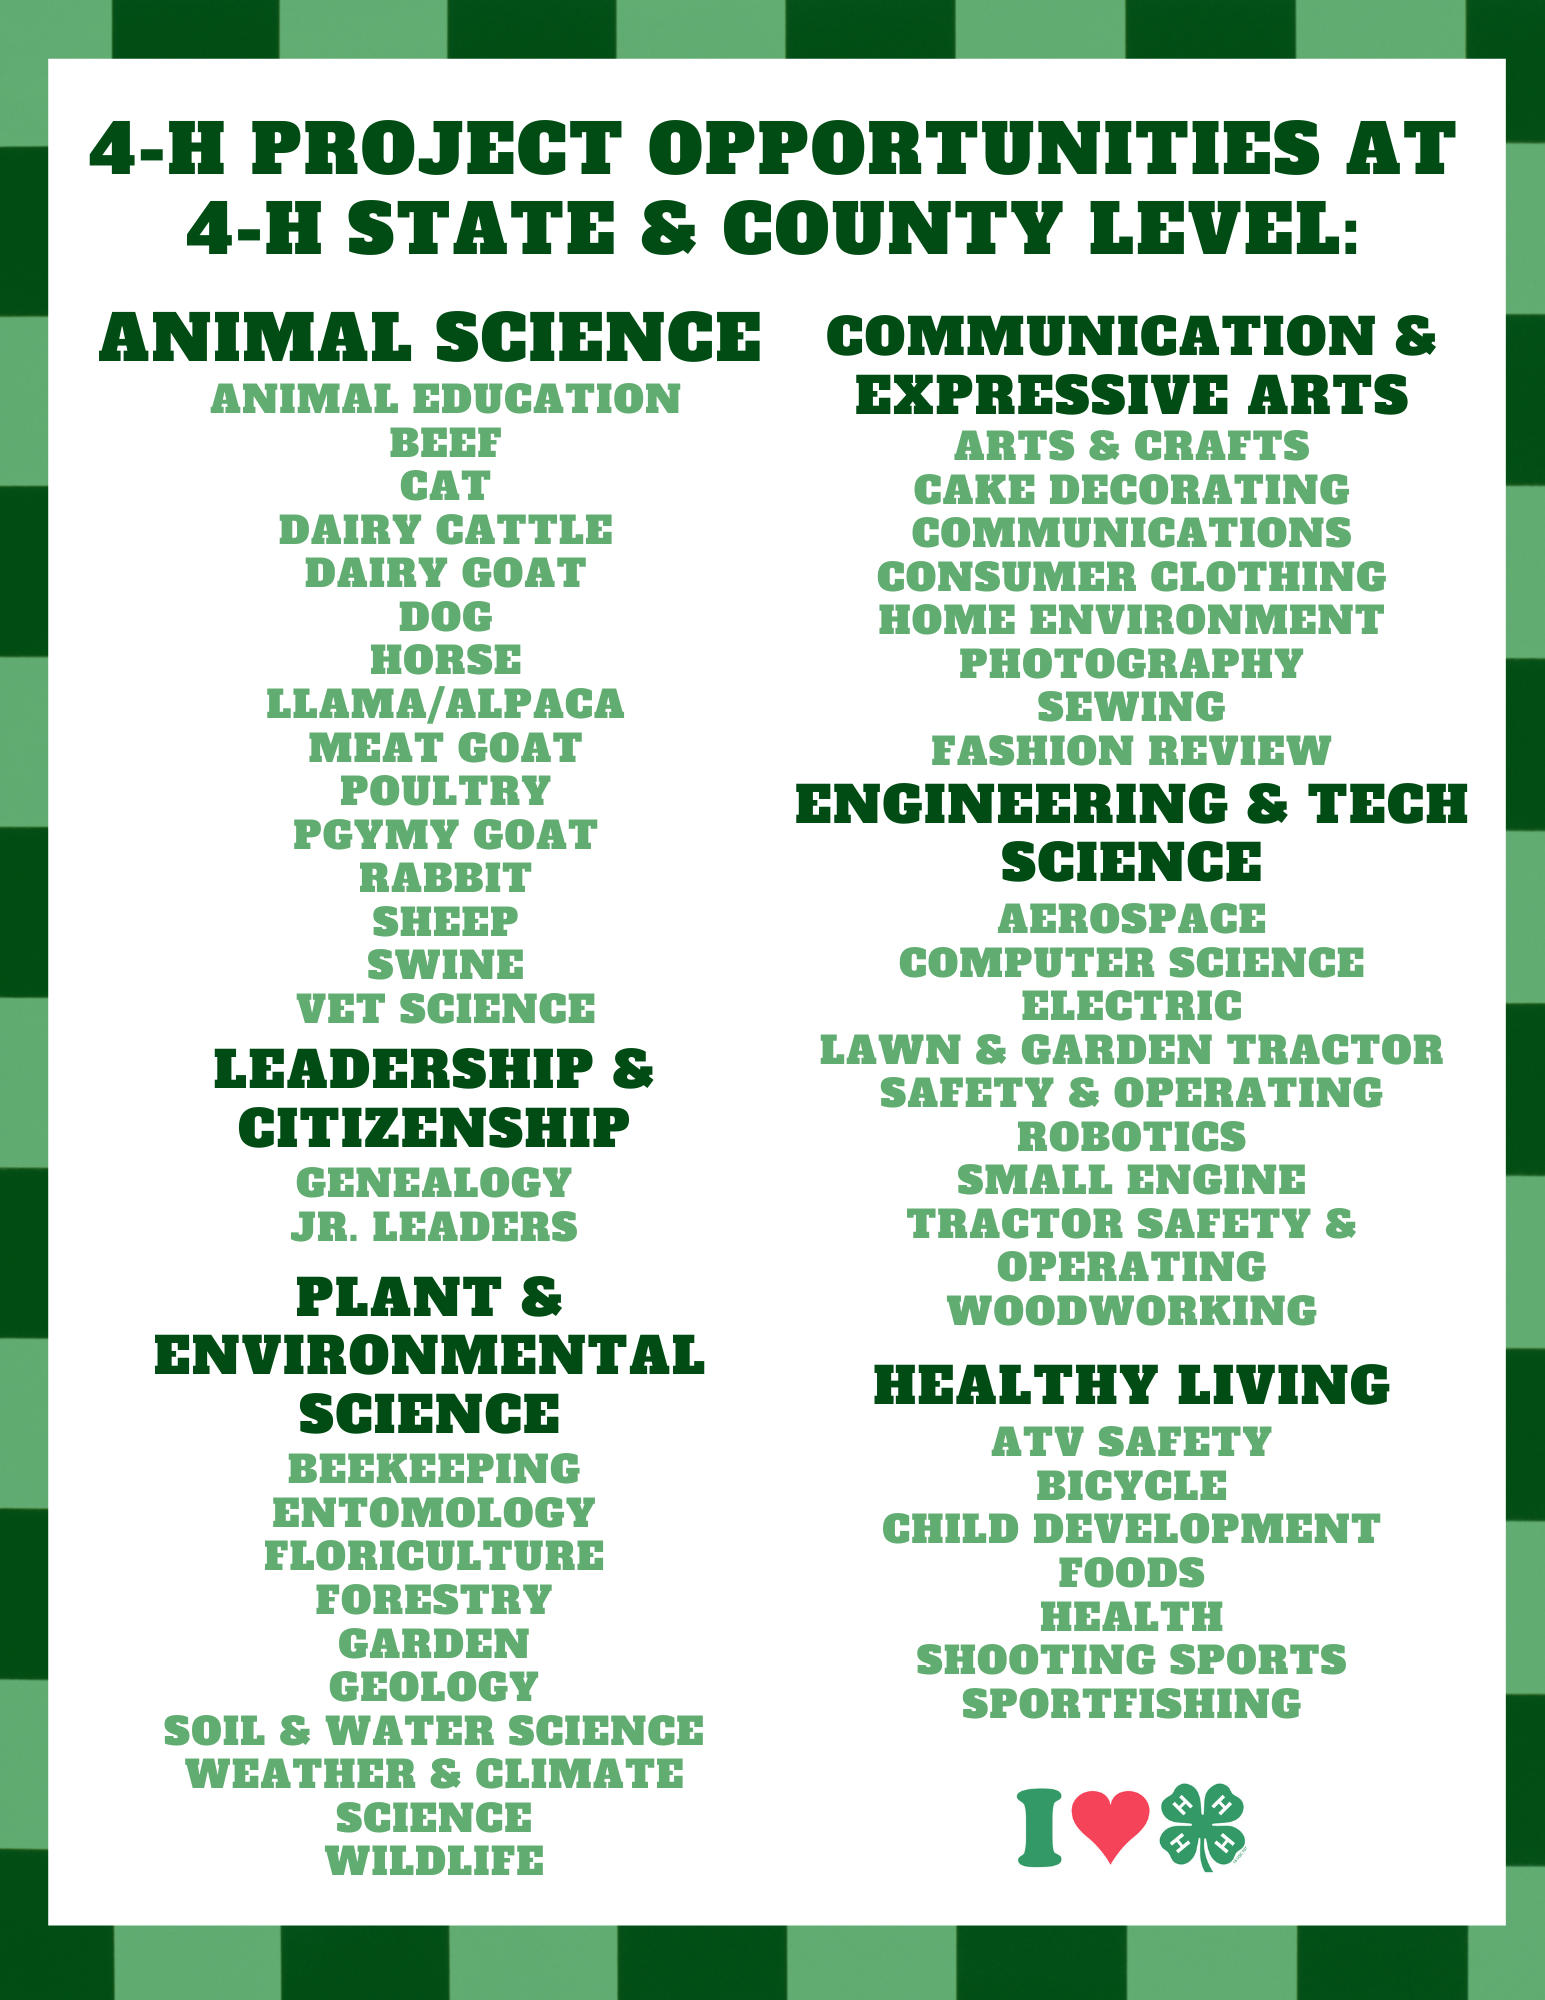 4-h-project-opportunities-at-state-level.png